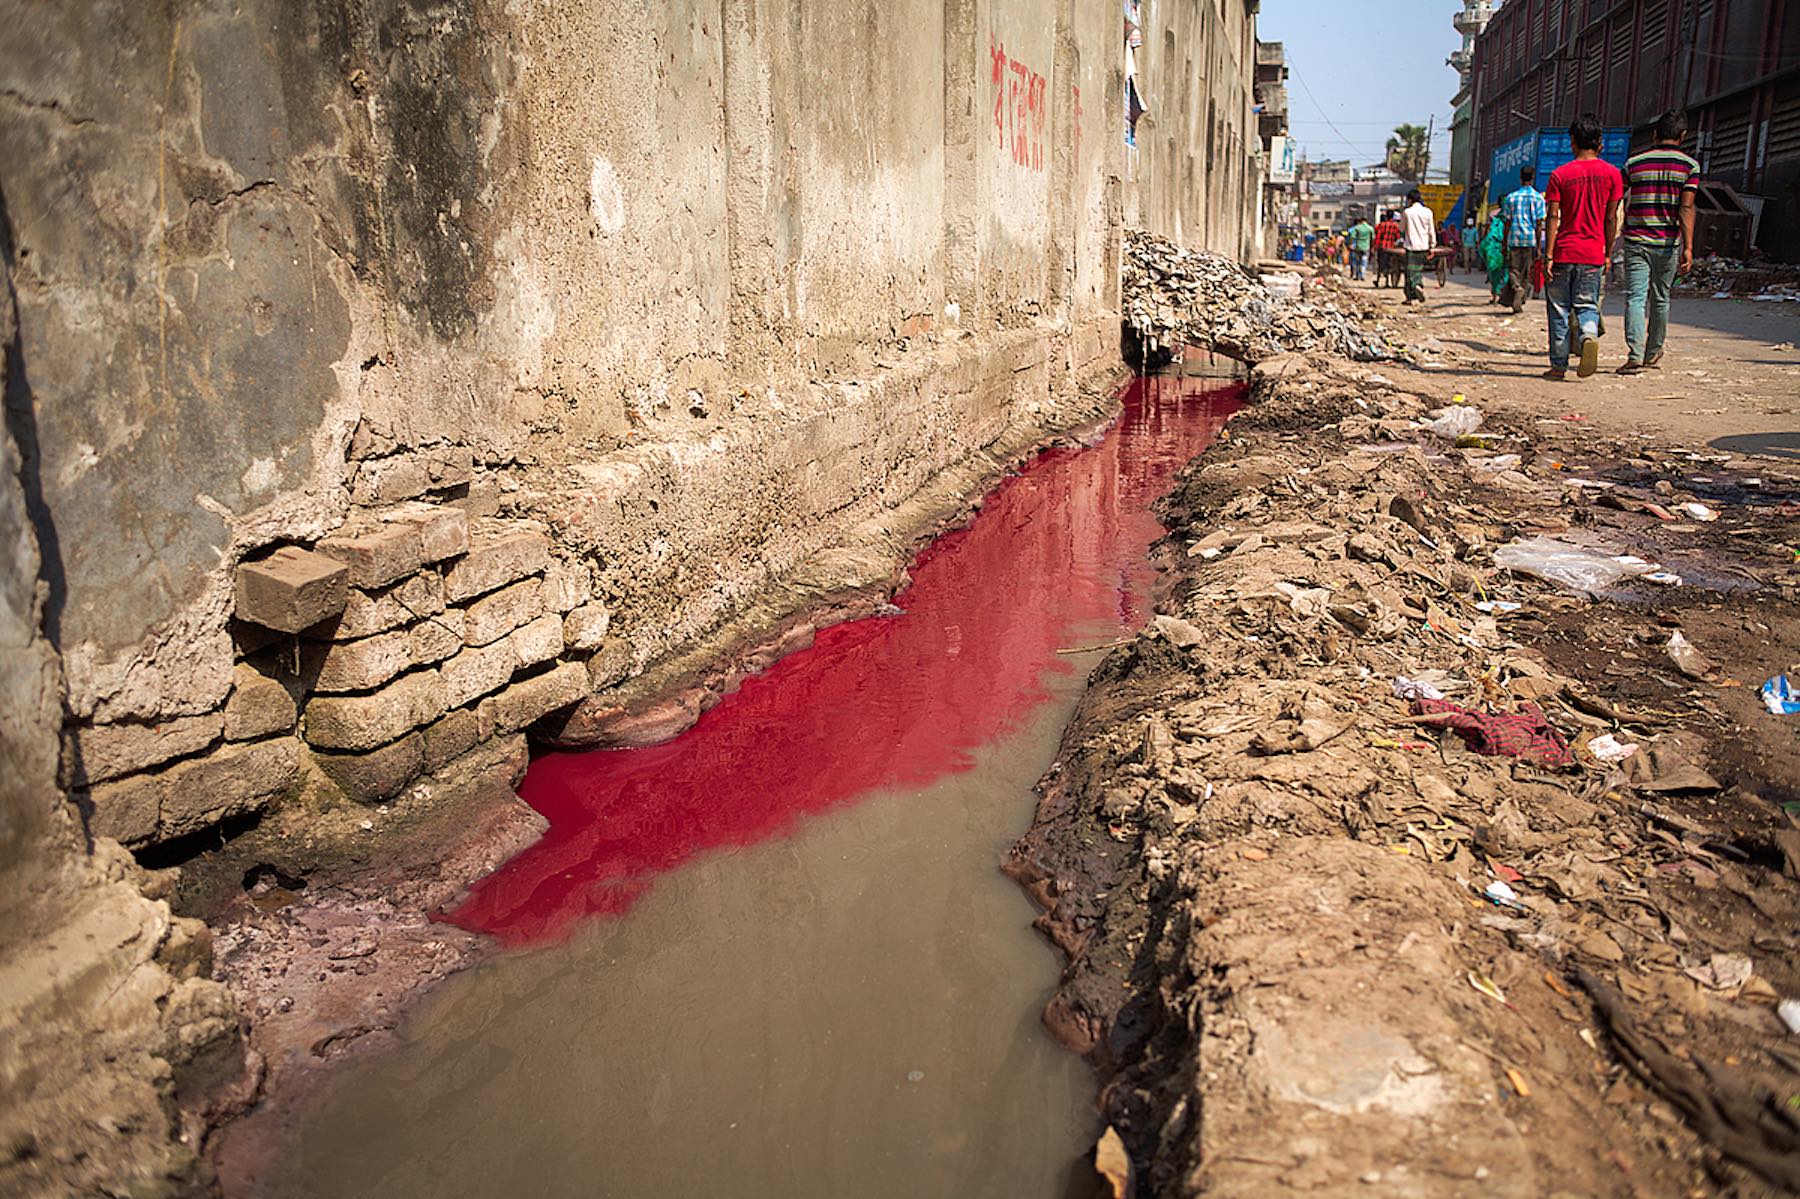 Waste water, red with dye, flows into an open drain in Hazaribagh, in western Dhaka.